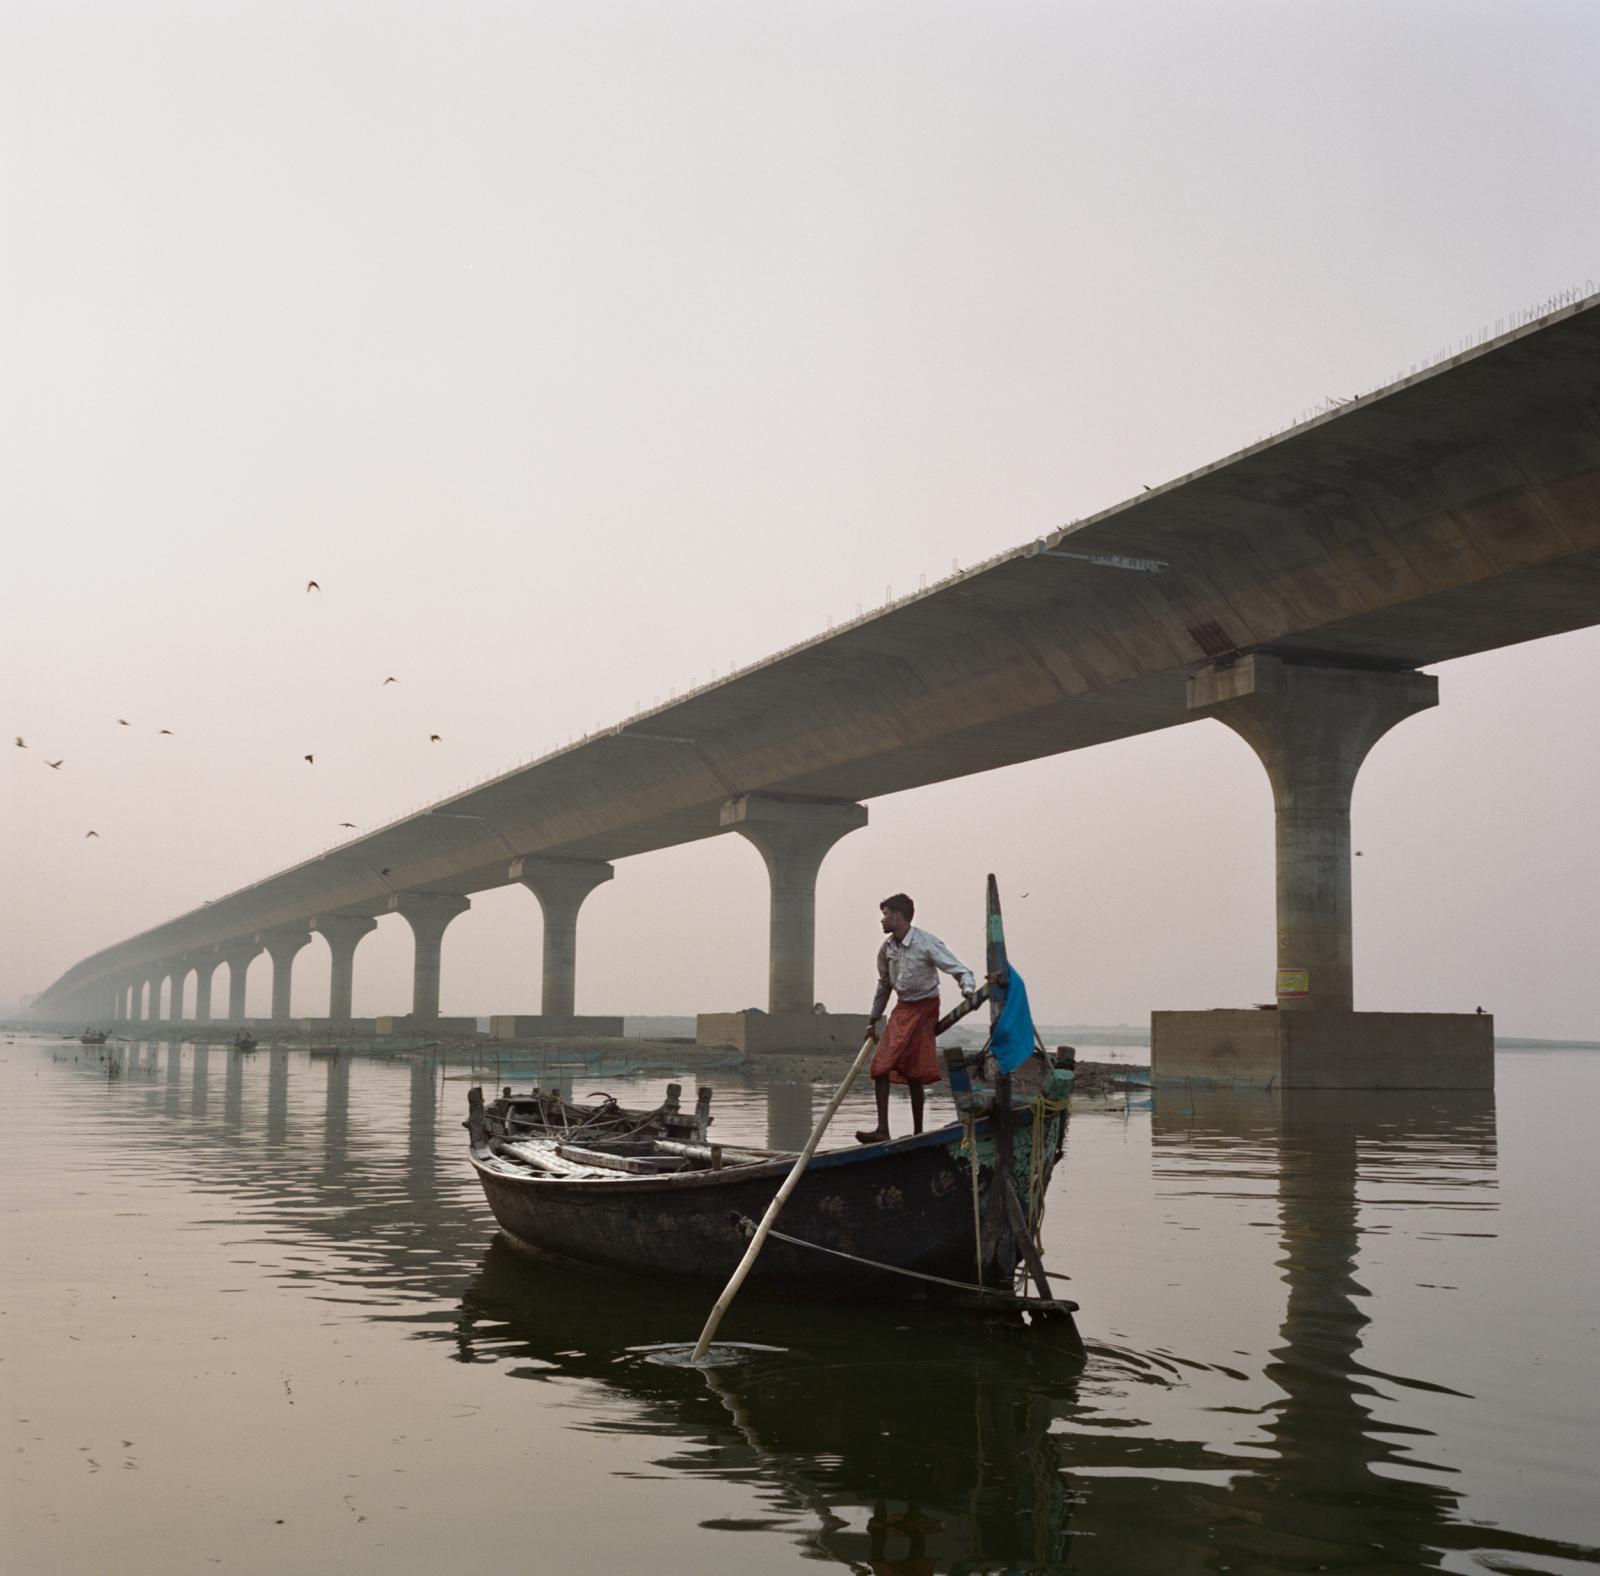 Saving India's Holiest River? - In Patna, a boatman surveys the Ganges near a recently...